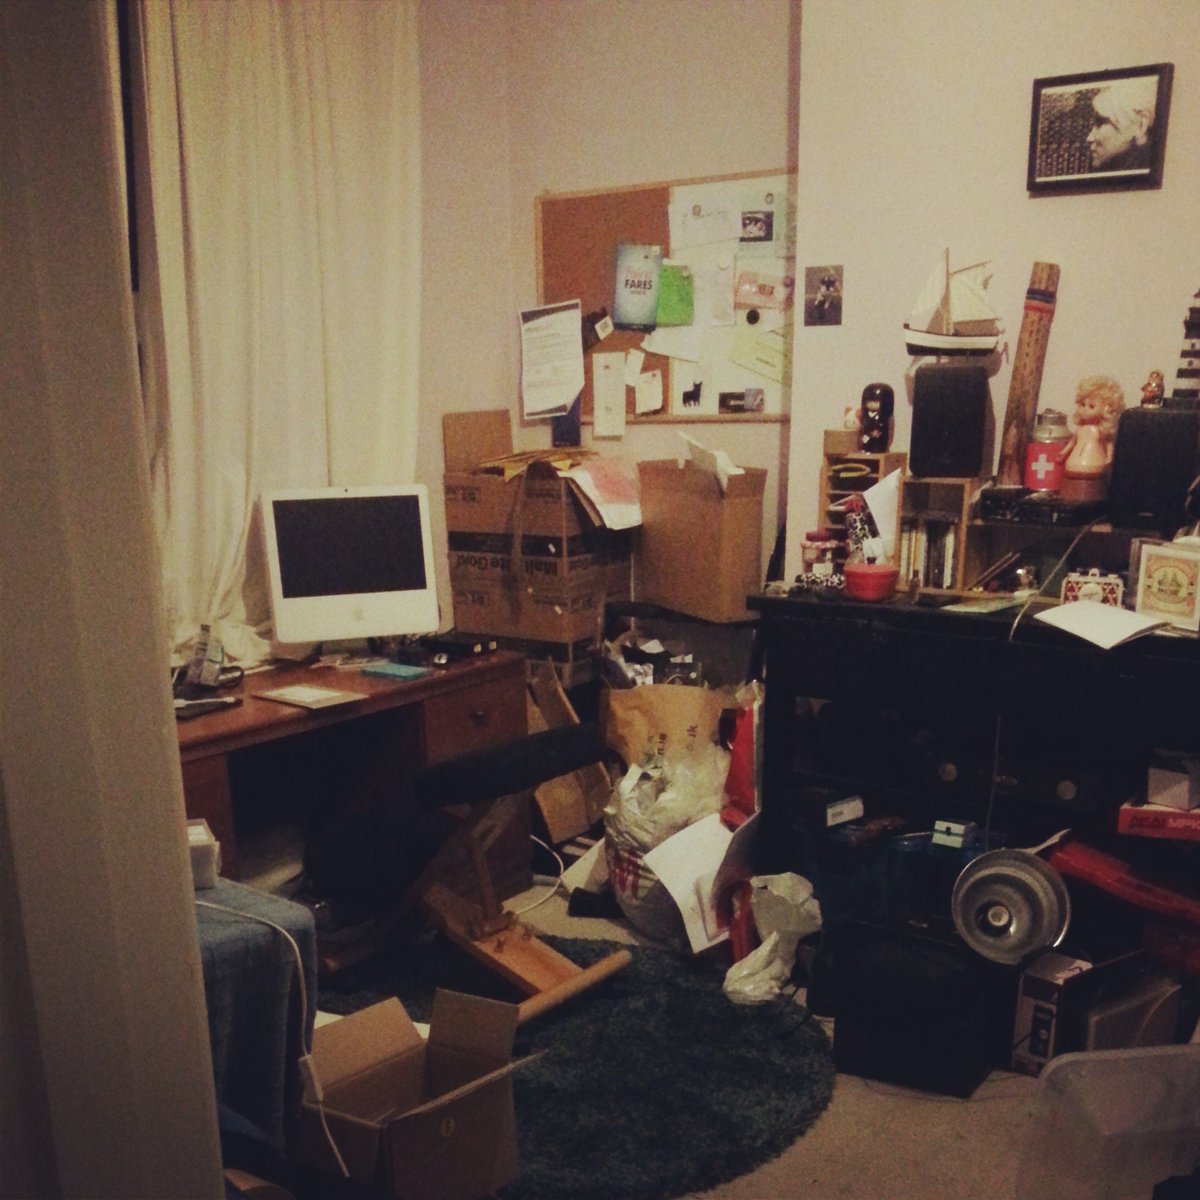 This is the first room I wrote DOT songs in (this is while moving in, it was usually tidier!!).